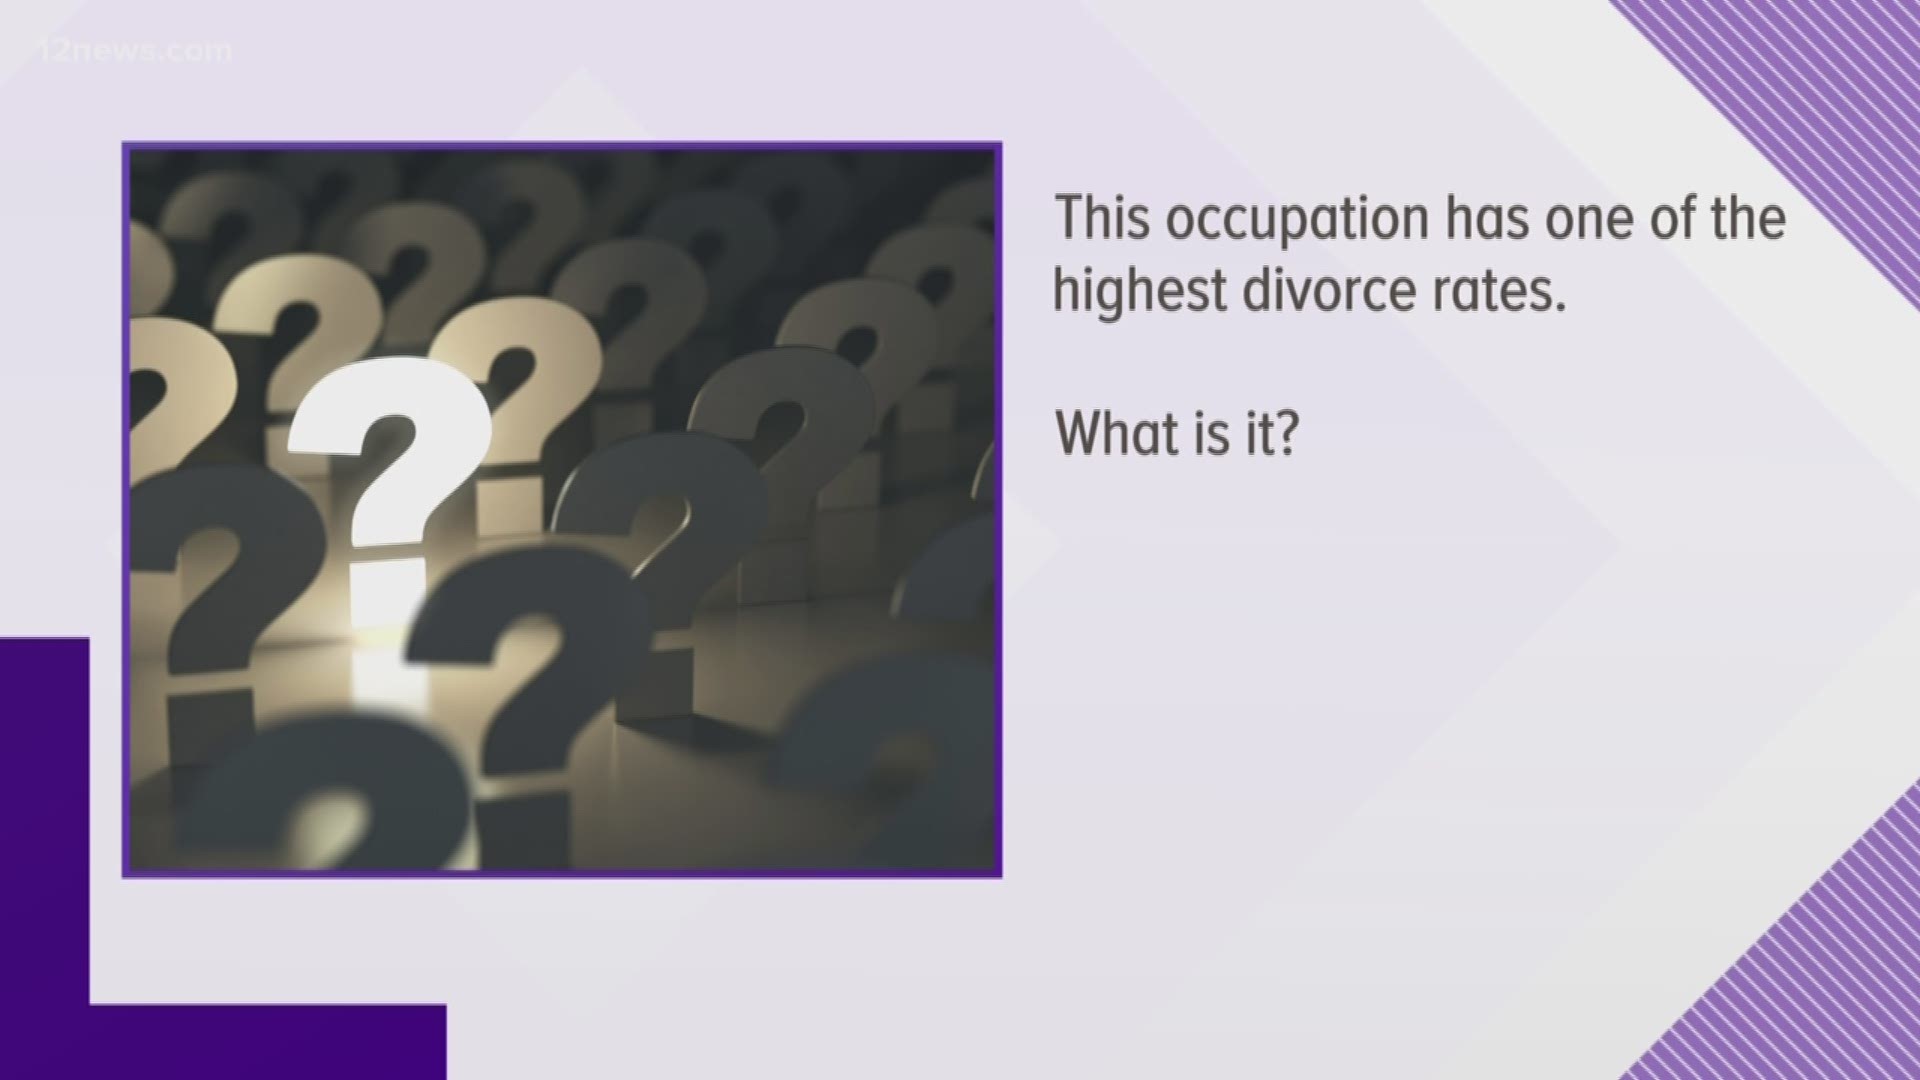 THIS occupation has one of the highest divorce rates. What is it?